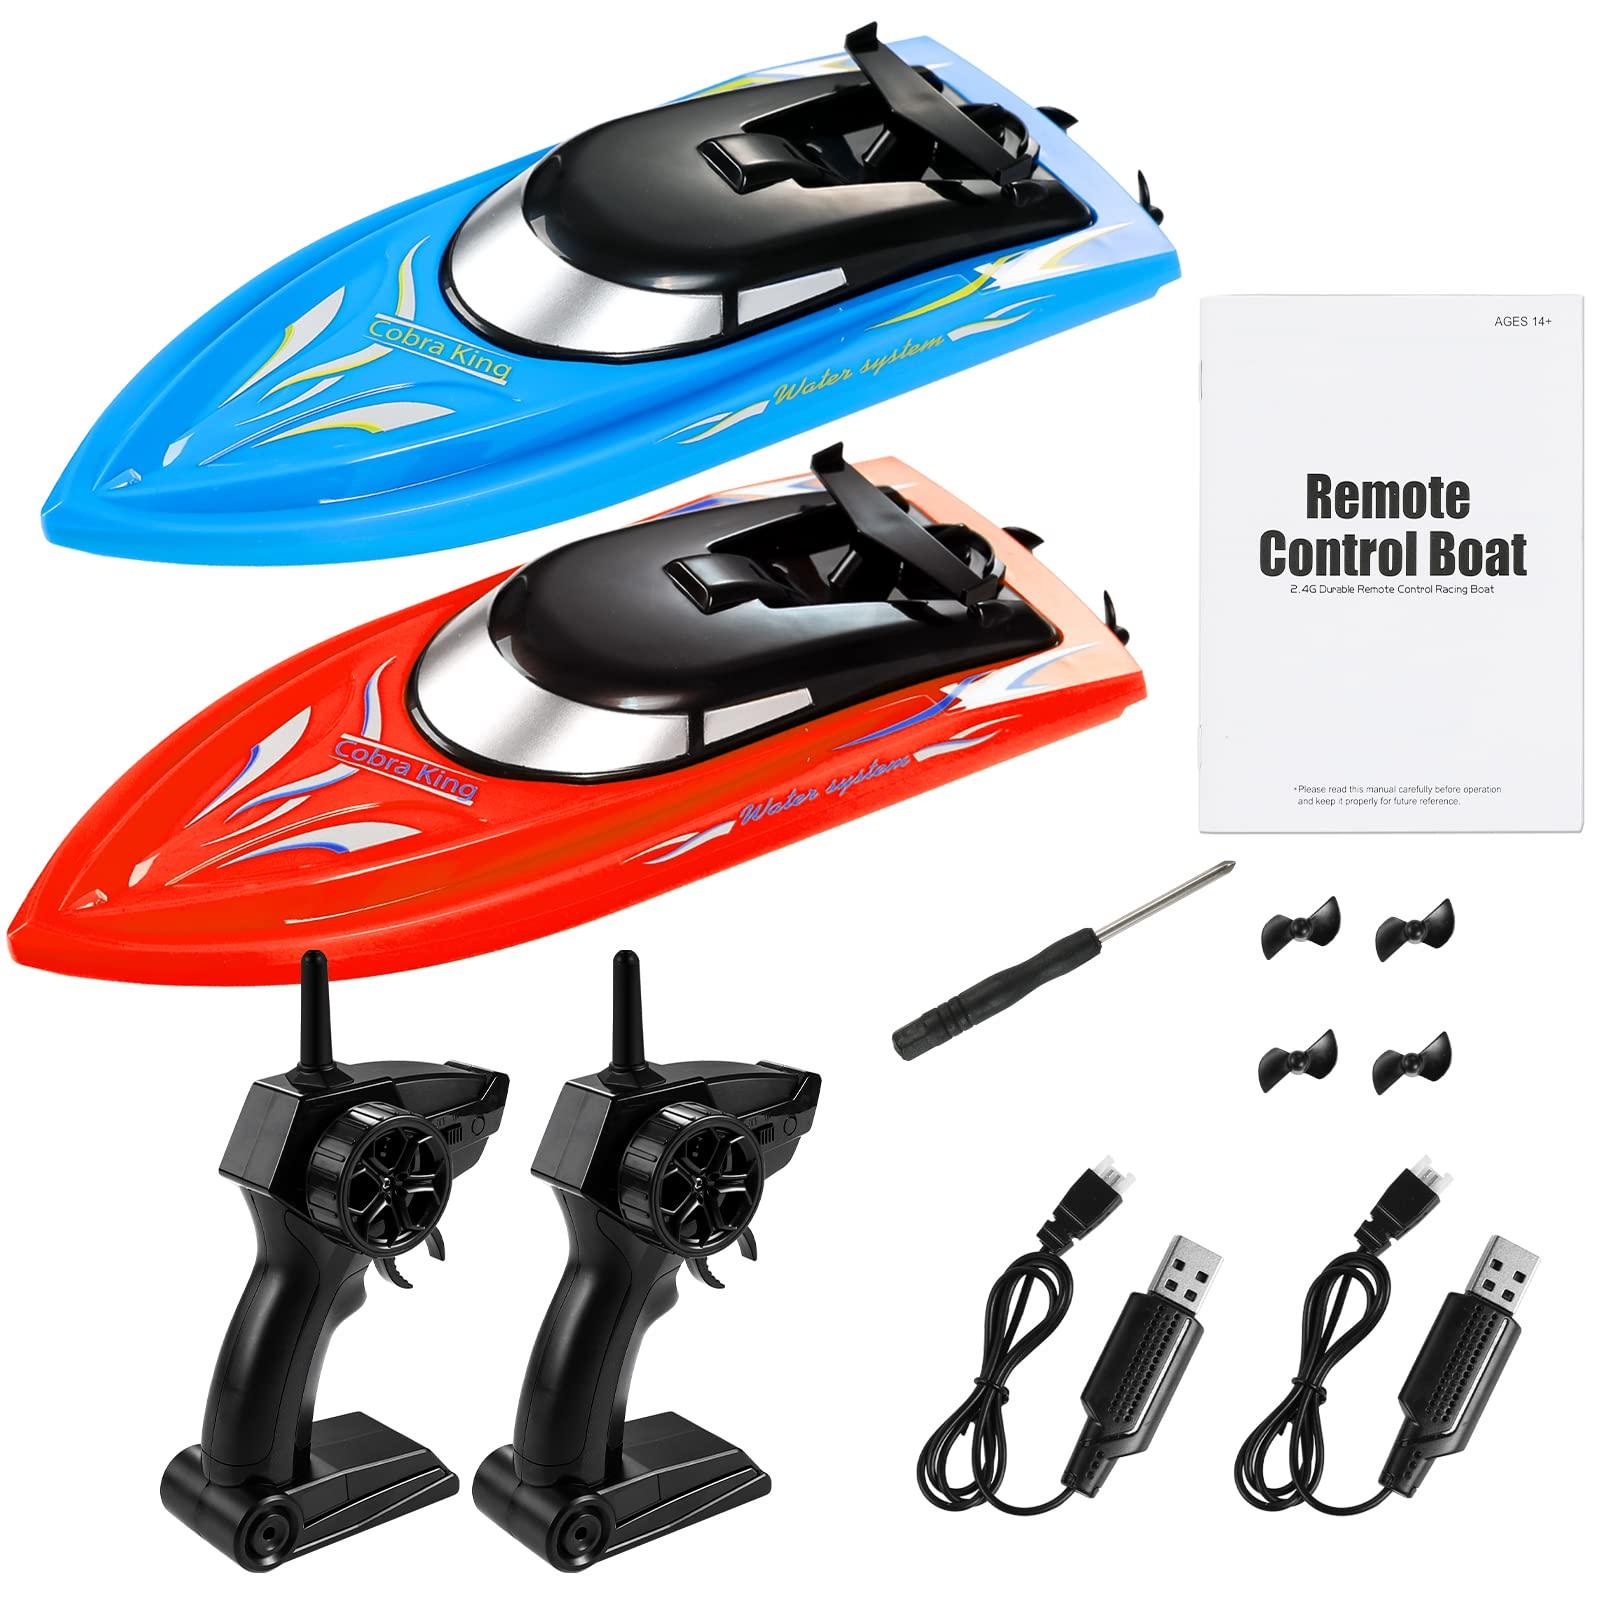 Remote Wali Boat:  The Remote Wali Boat: Advanced Safety Features and Specifications